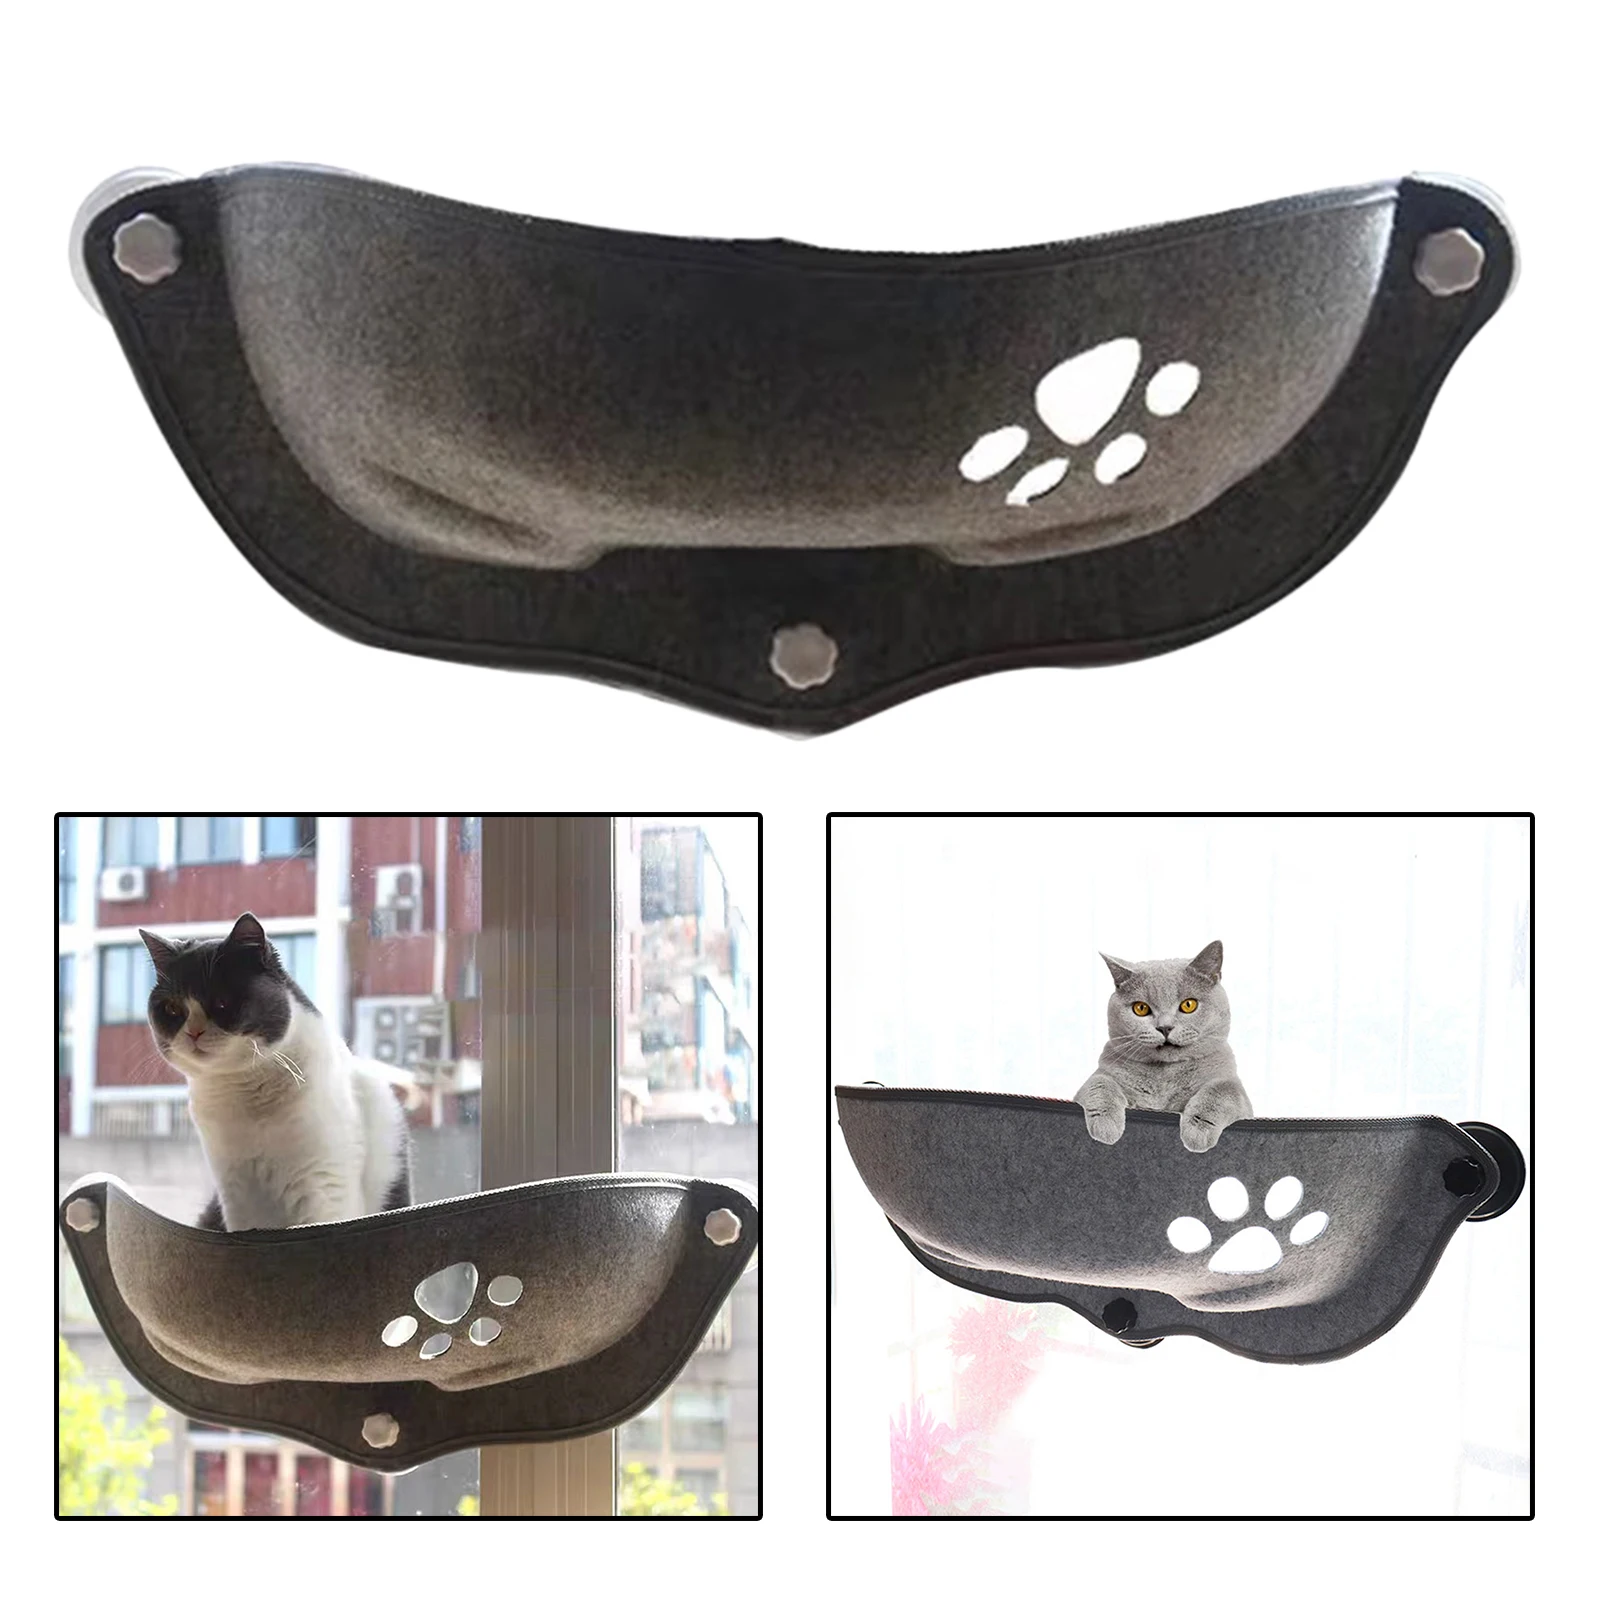 Cat Window Mounted Bed Hammock with Suction Cups - Kitty Windows Perch Car Swing Bed Seat Lounger Resting Sofa Safe Sunbath Bed